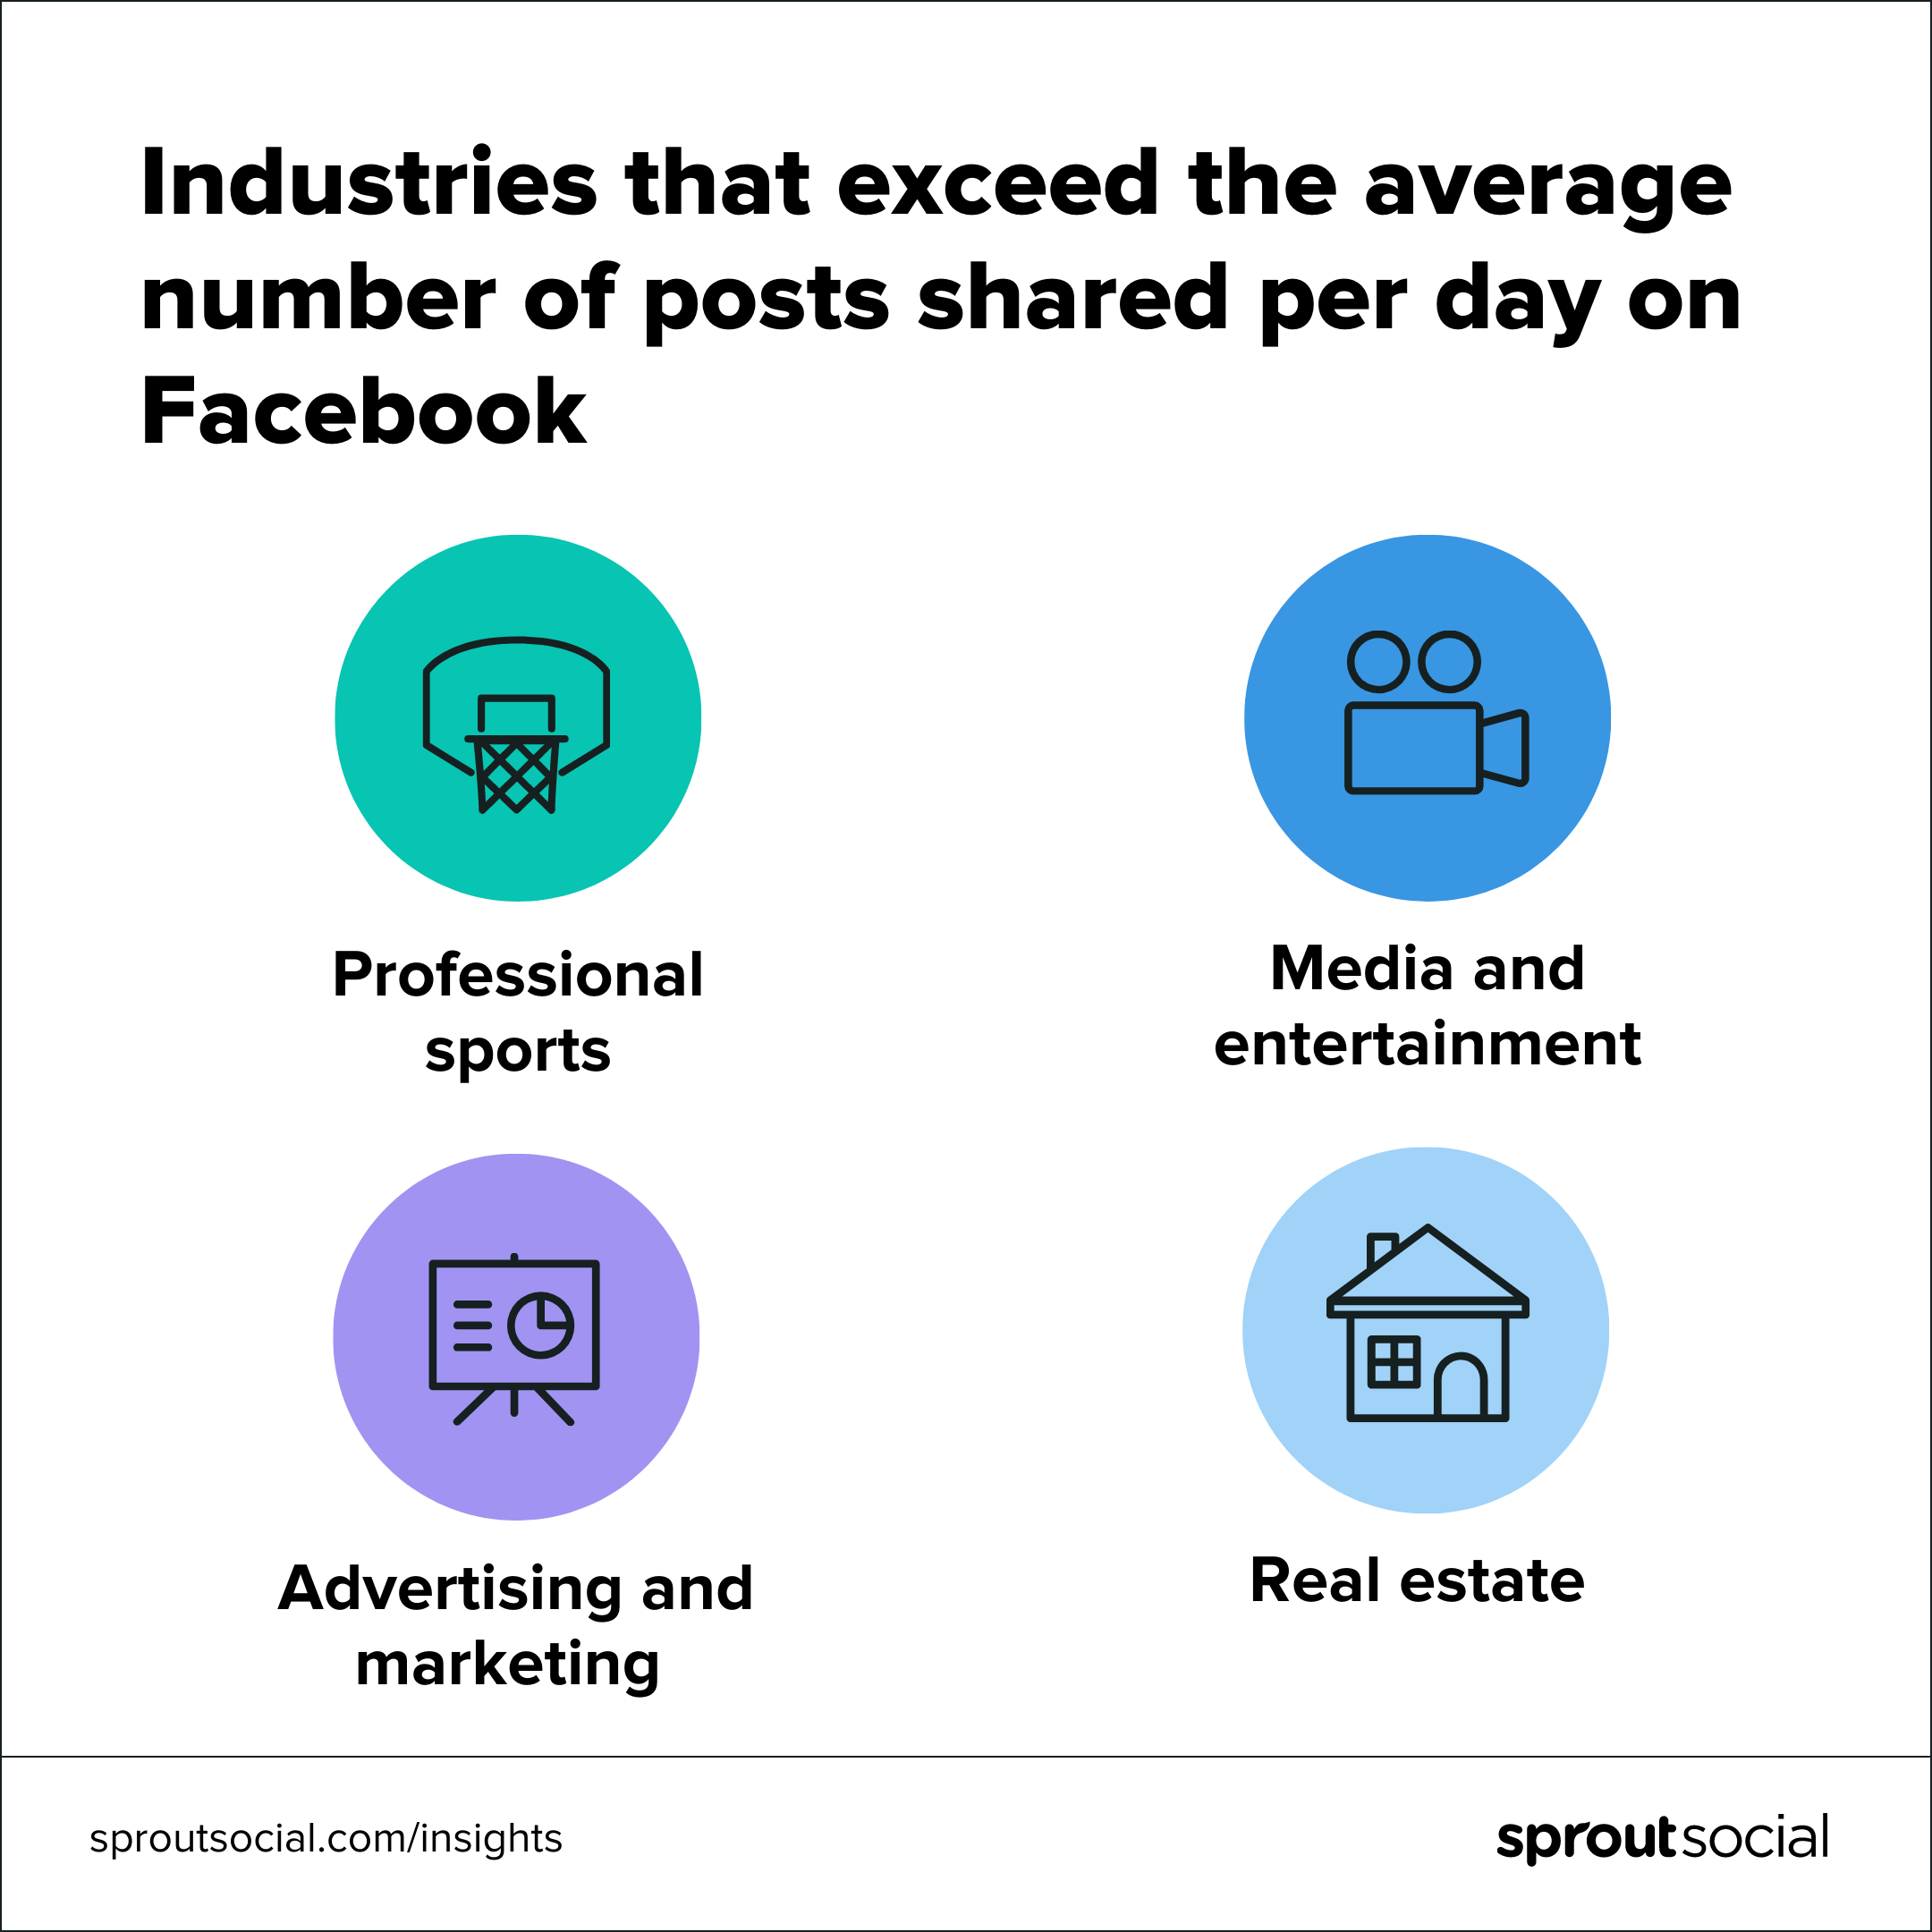 A chart showing four industries that exceed the average number of posts shared on Facebook per day. The industries include professional sports, media and entertainment, advertising and marketing, and real estate.